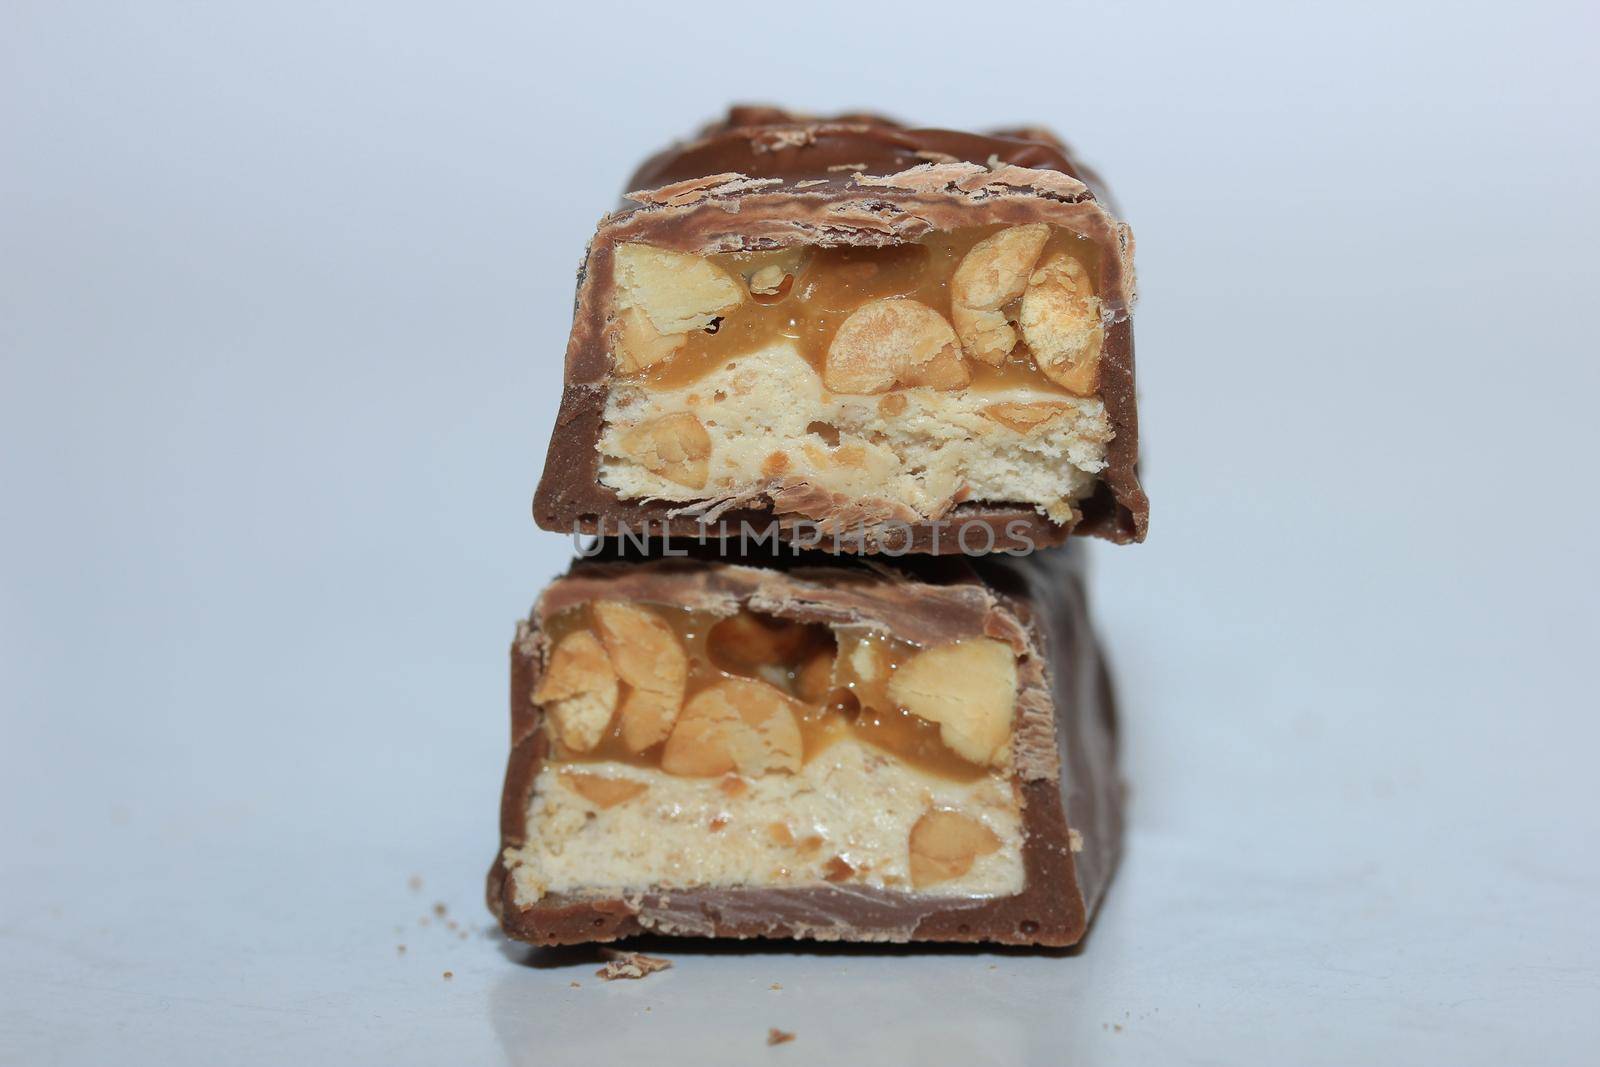 Chocolate candy bars in half on a white background